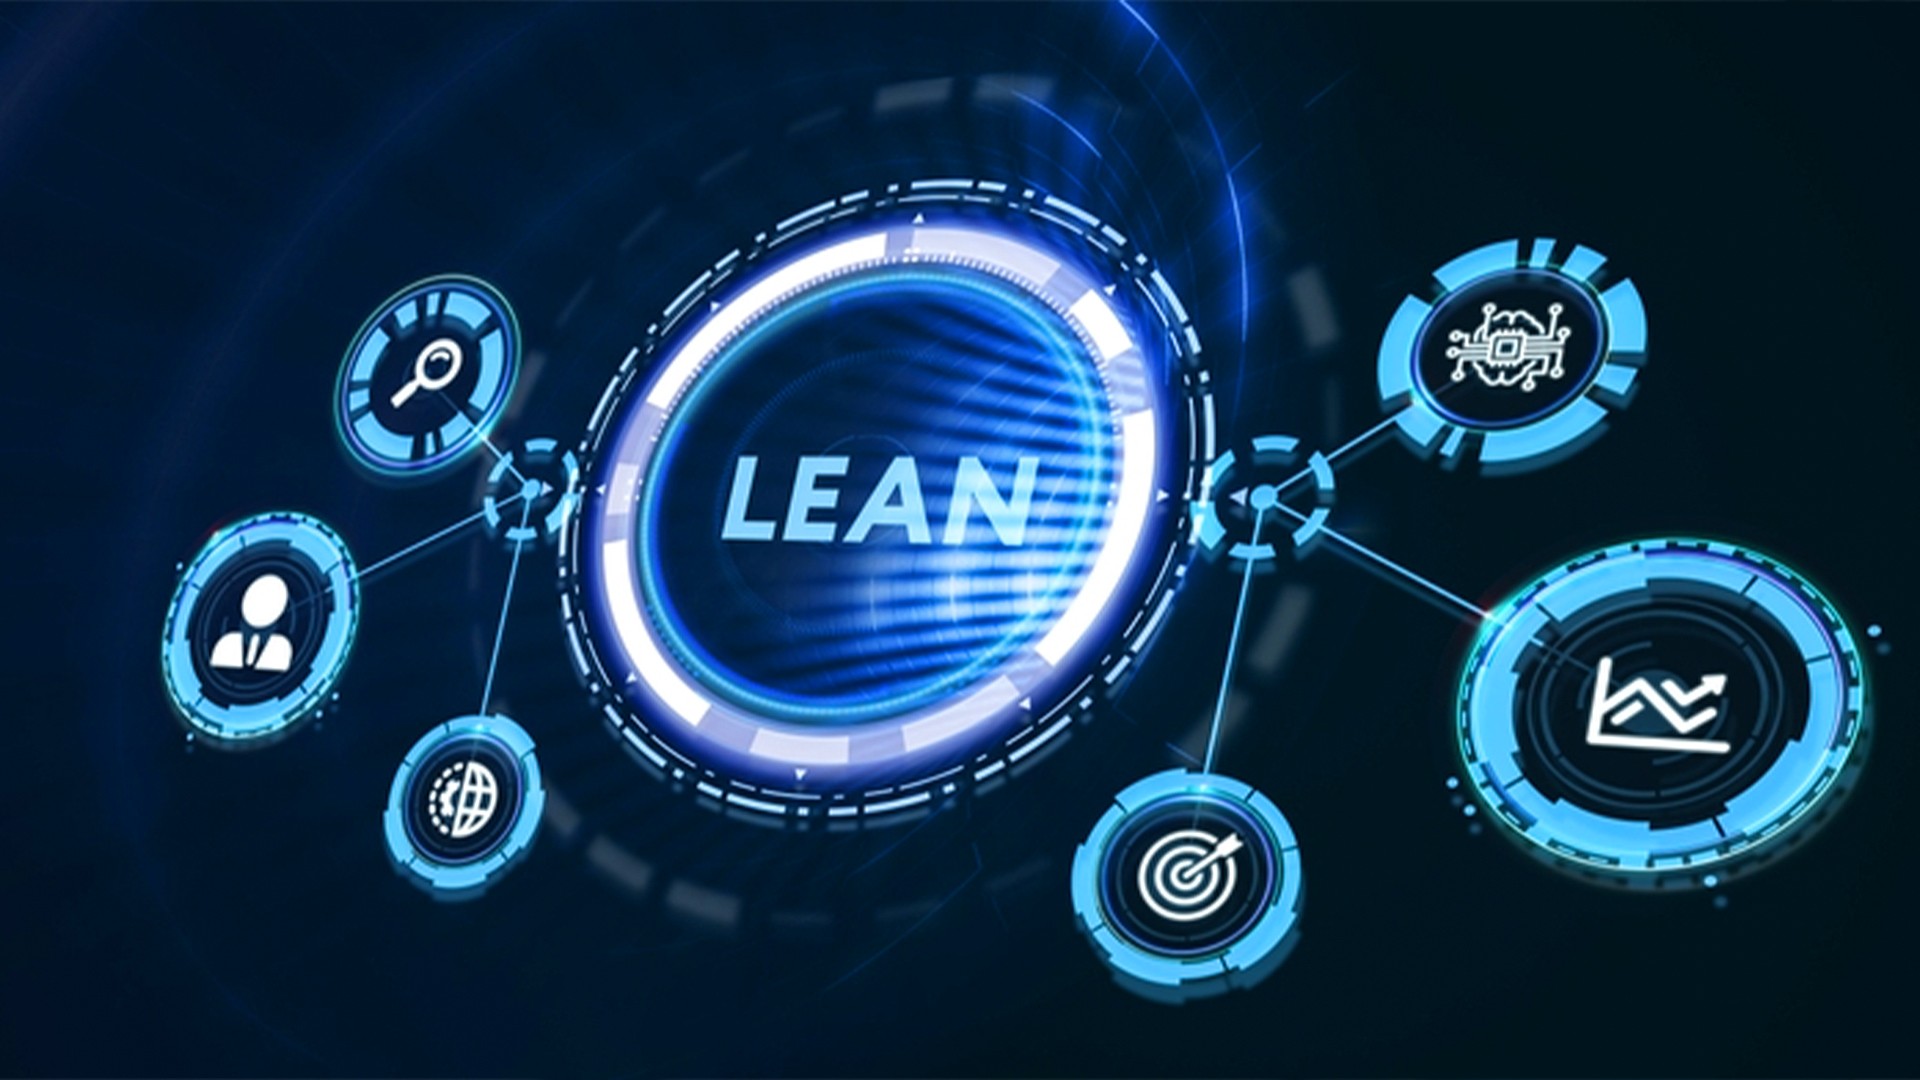 Lean management in healthcare